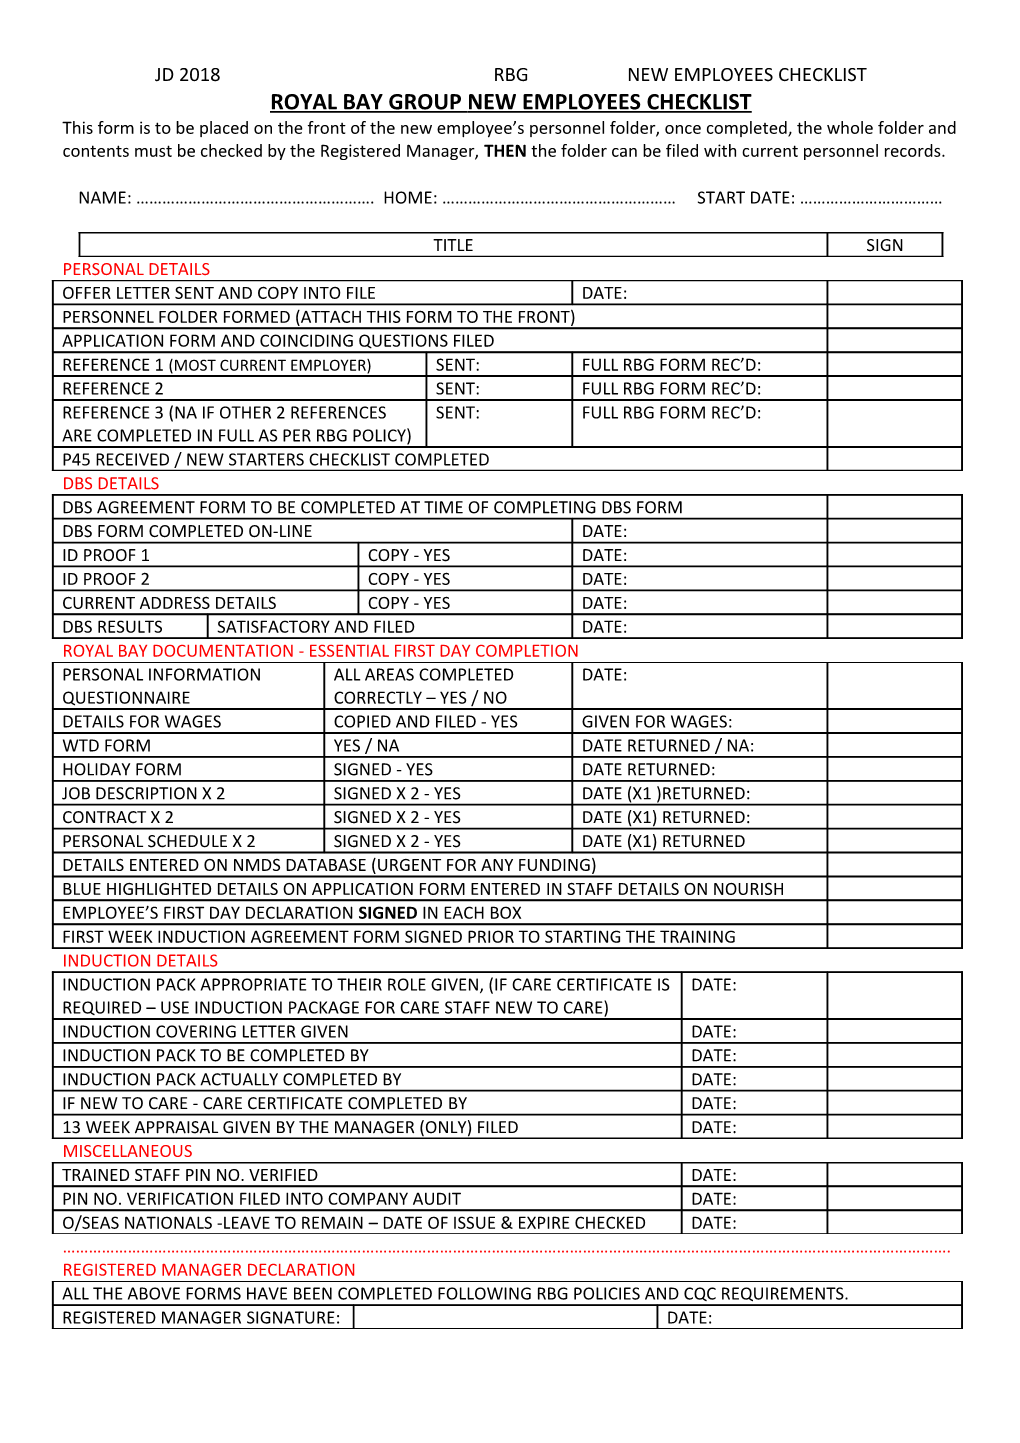 Easy Glance Reference Form for New Employees